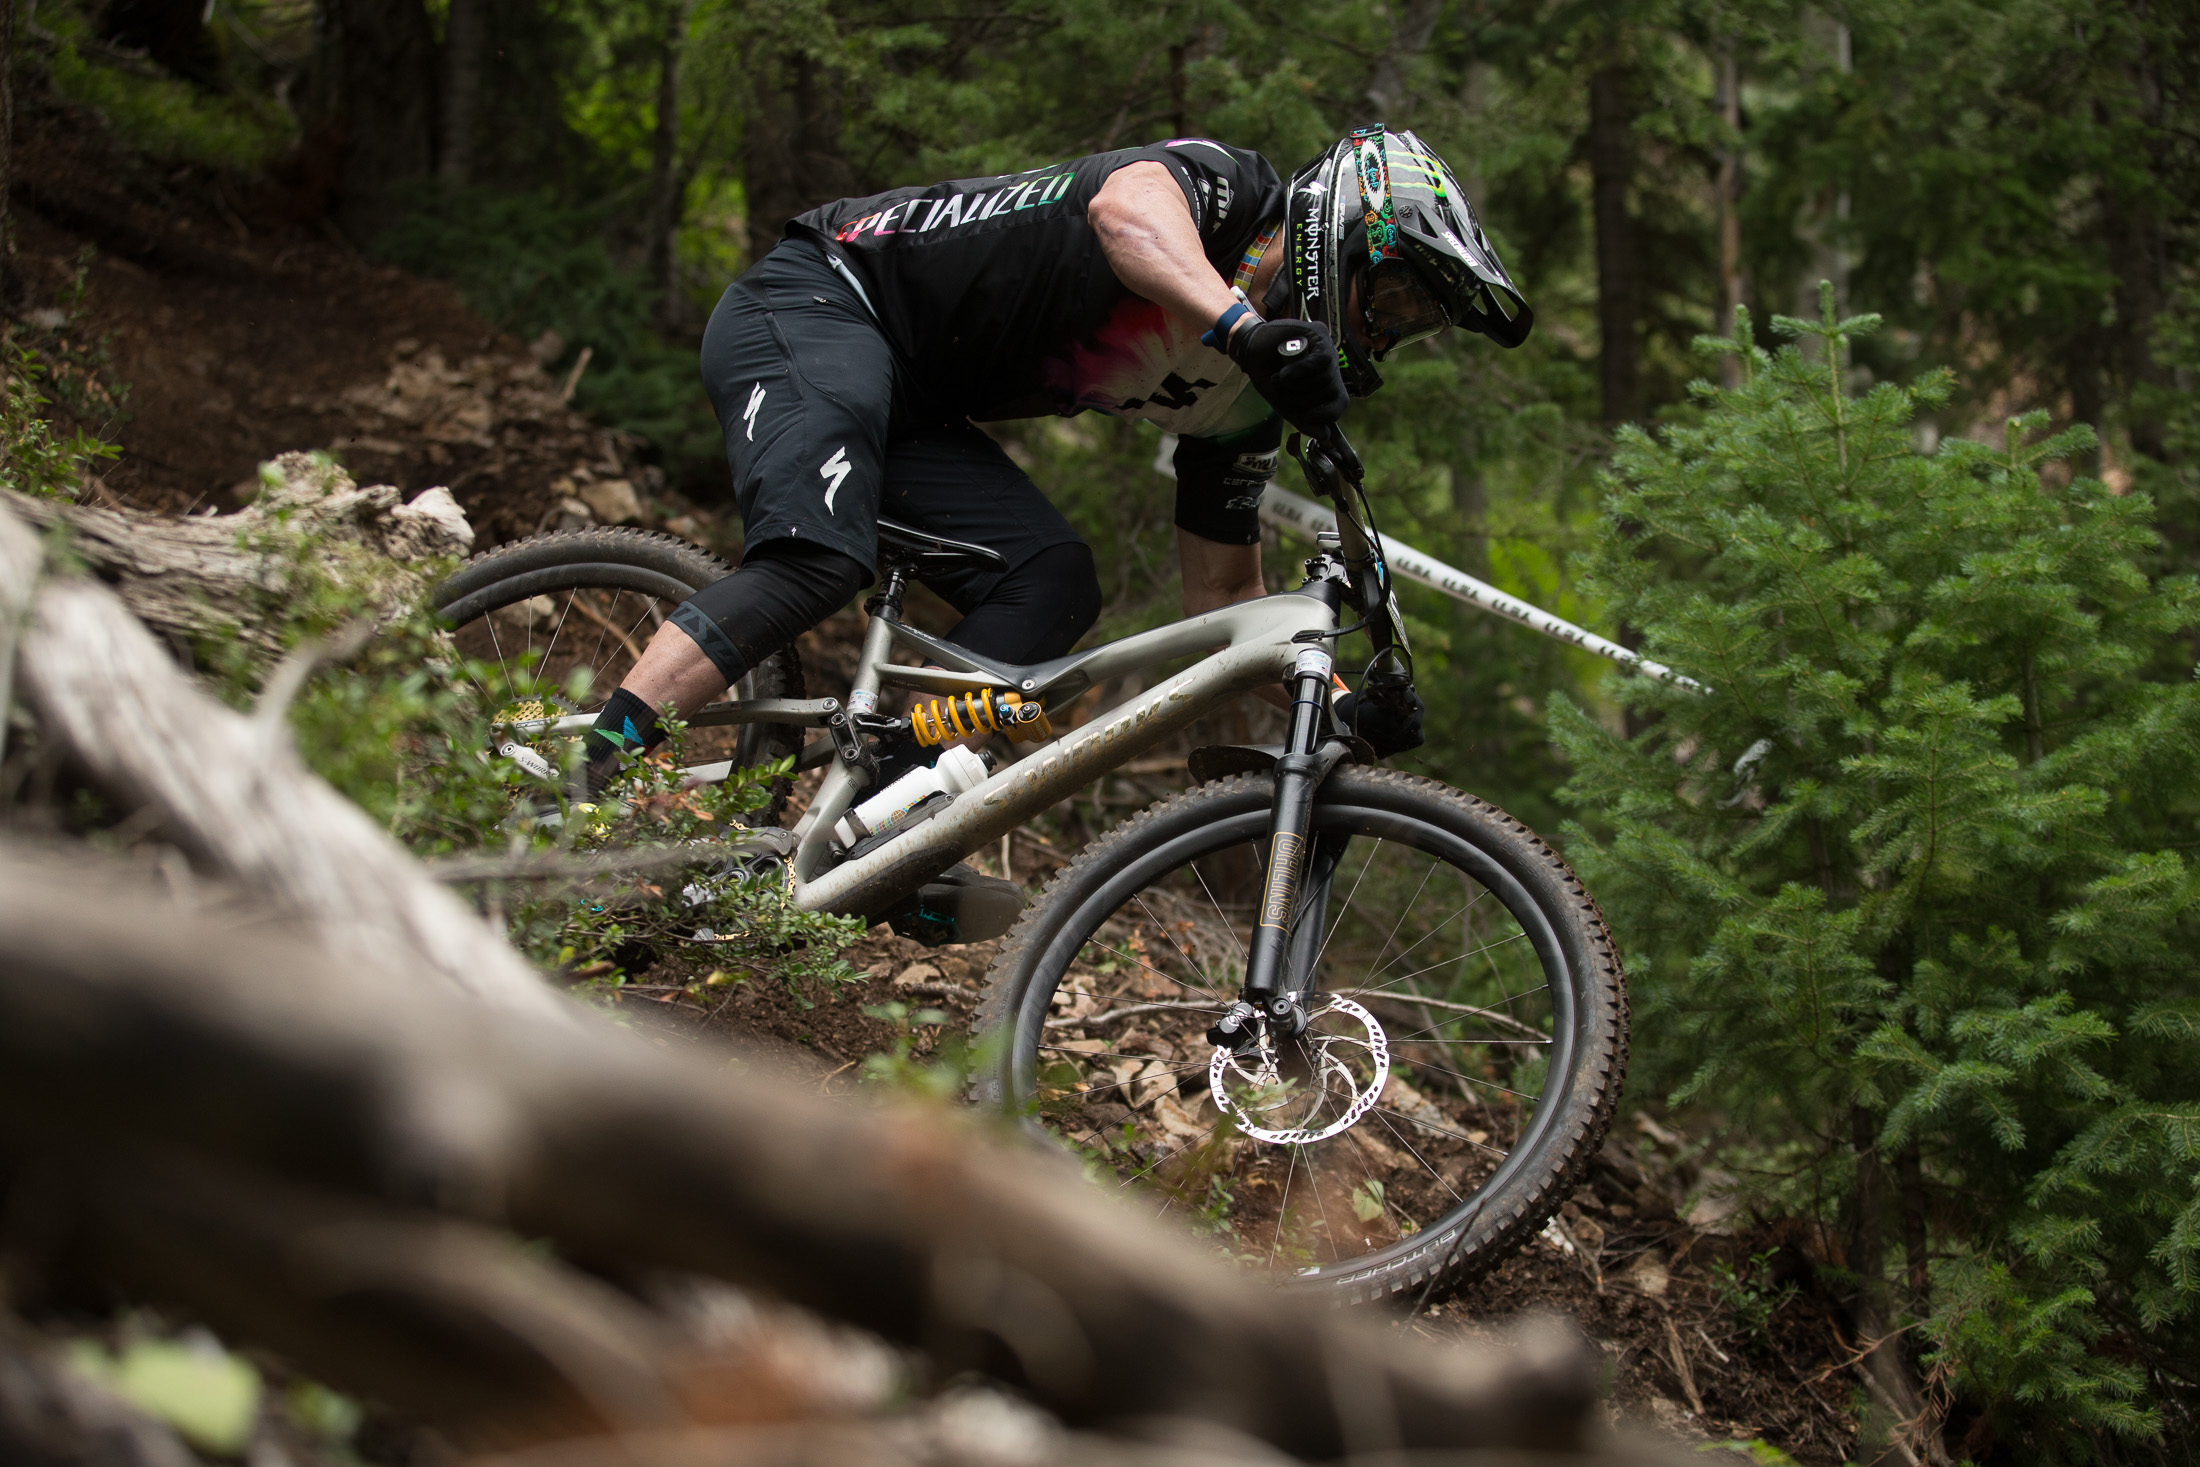 Monster Energy’s Jared Graves Takes Third Place at Enduro World Series Round 6 in Aspen, Co